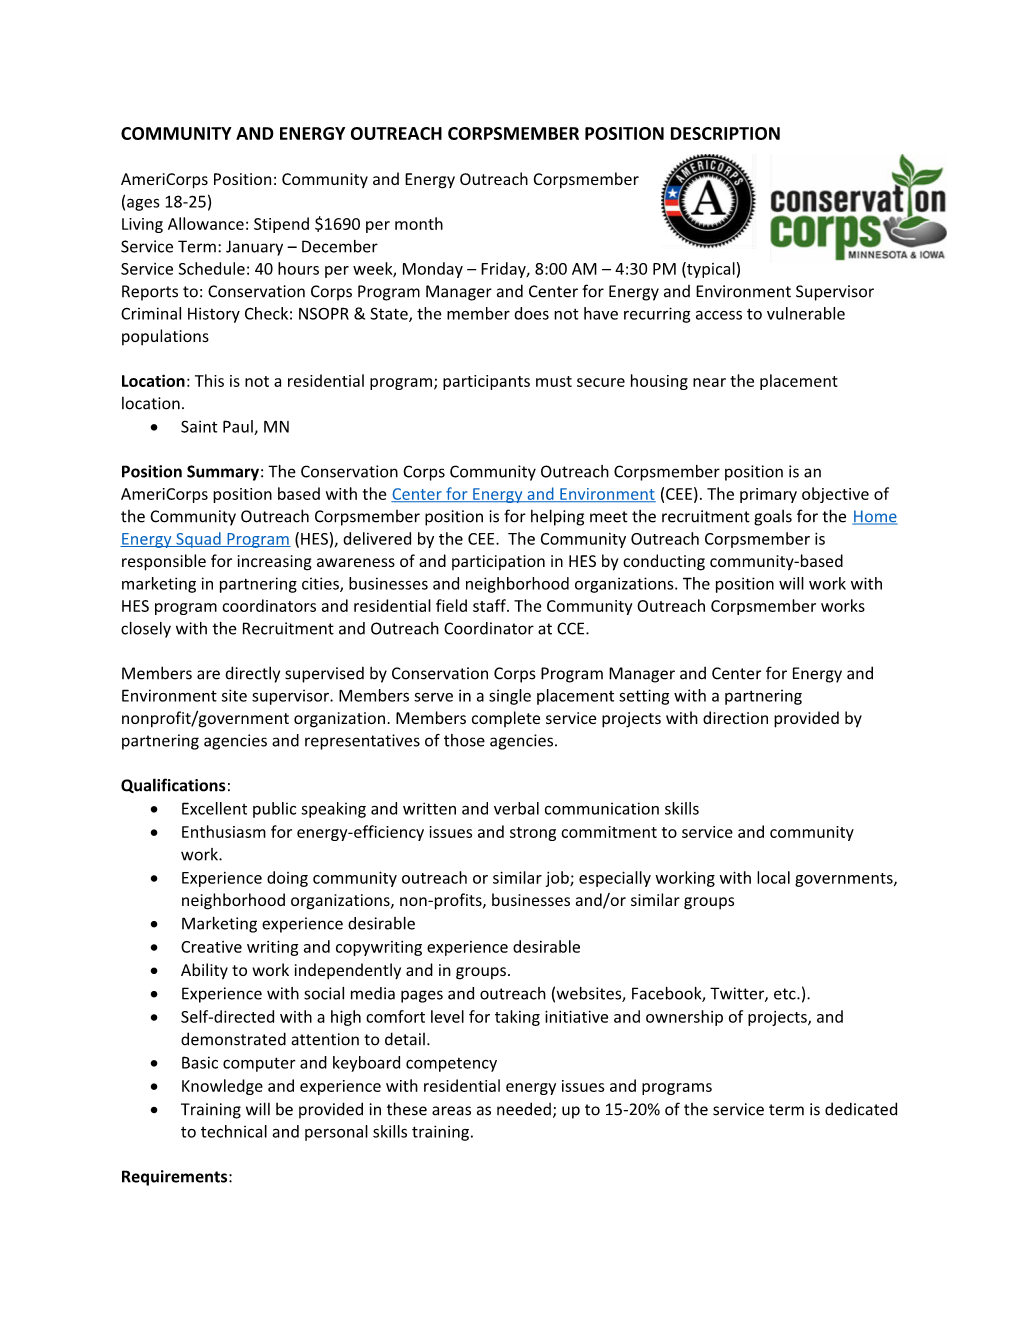 Community and Energy Outreach Corpsmember Position Description